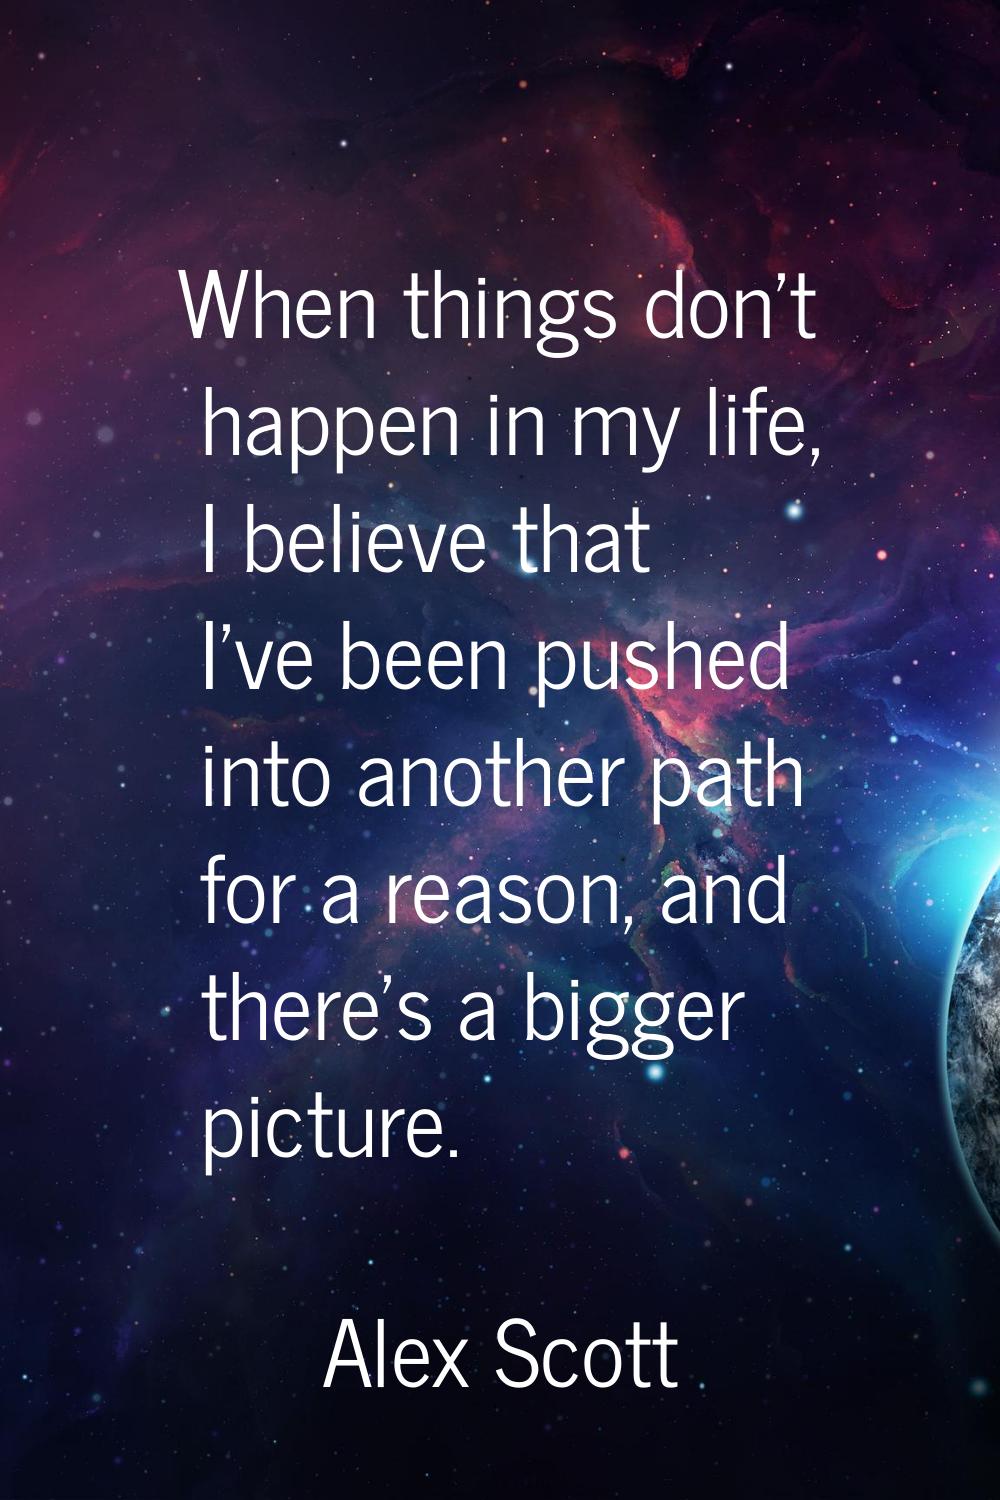 When things don't happen in my life, I believe that I've been pushed into another path for a reason